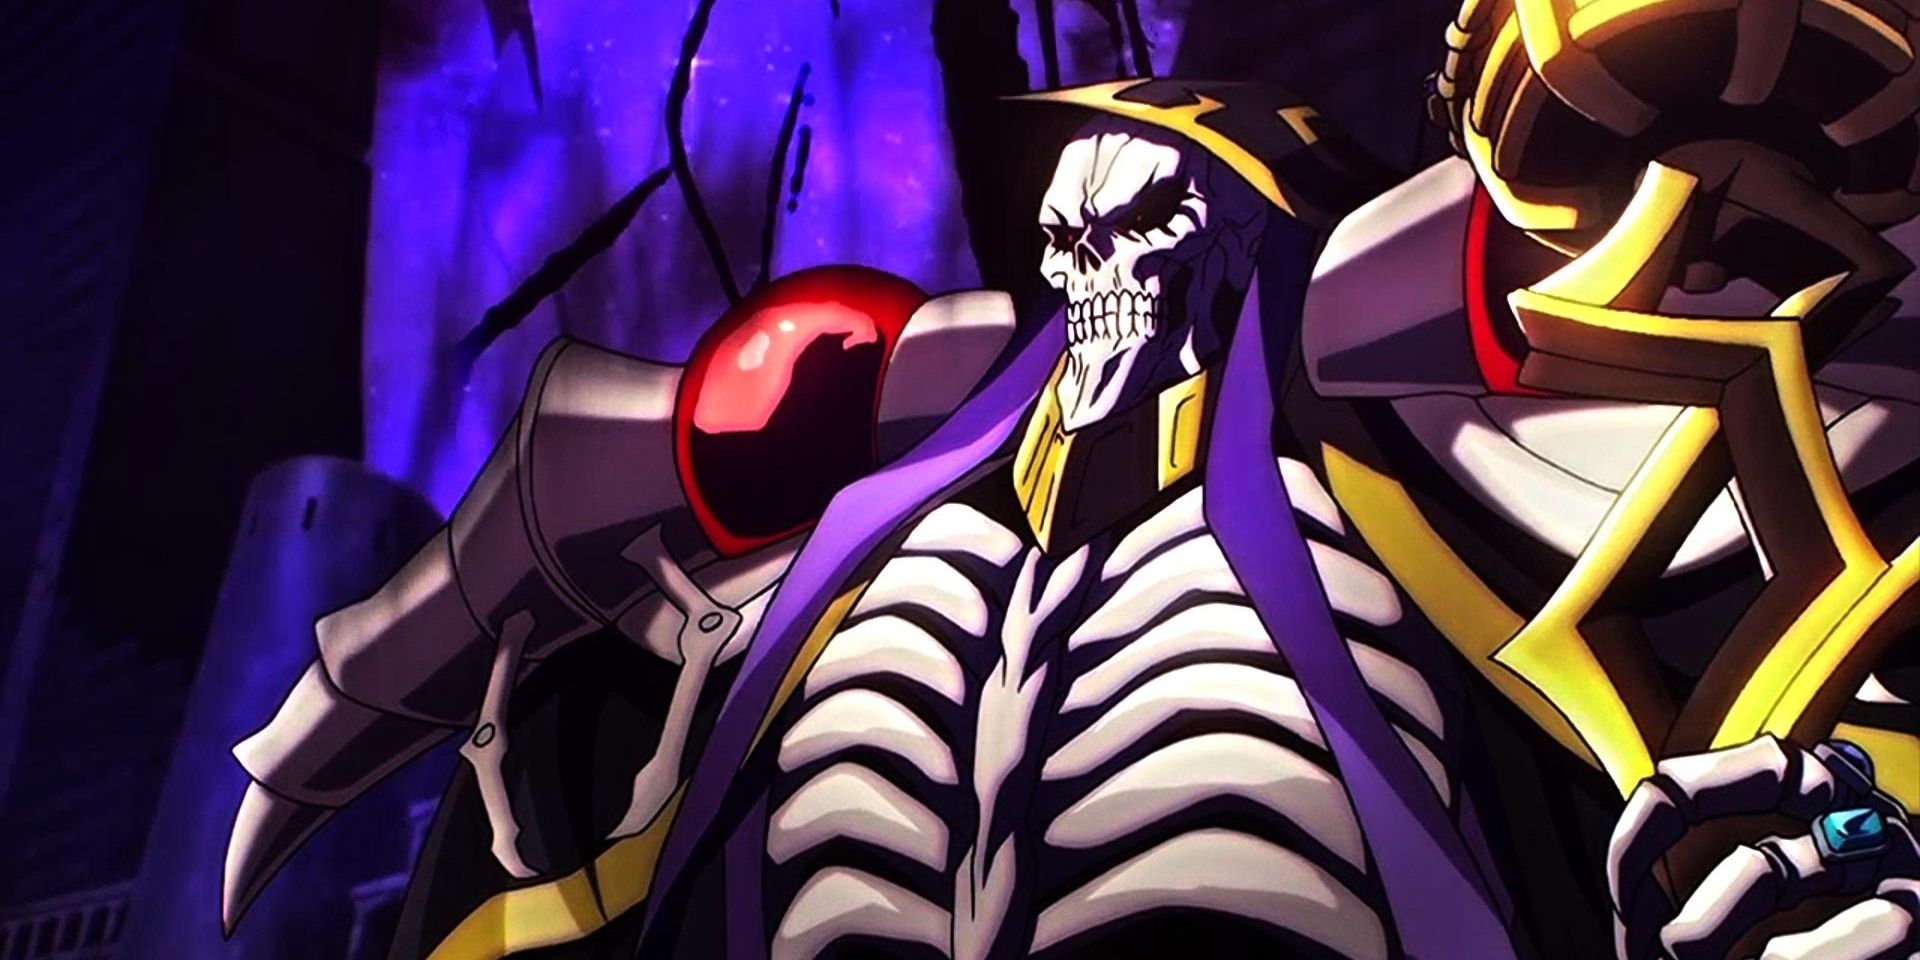 screenshot from the tv show featuring the main character who it a powerful skeletal being.